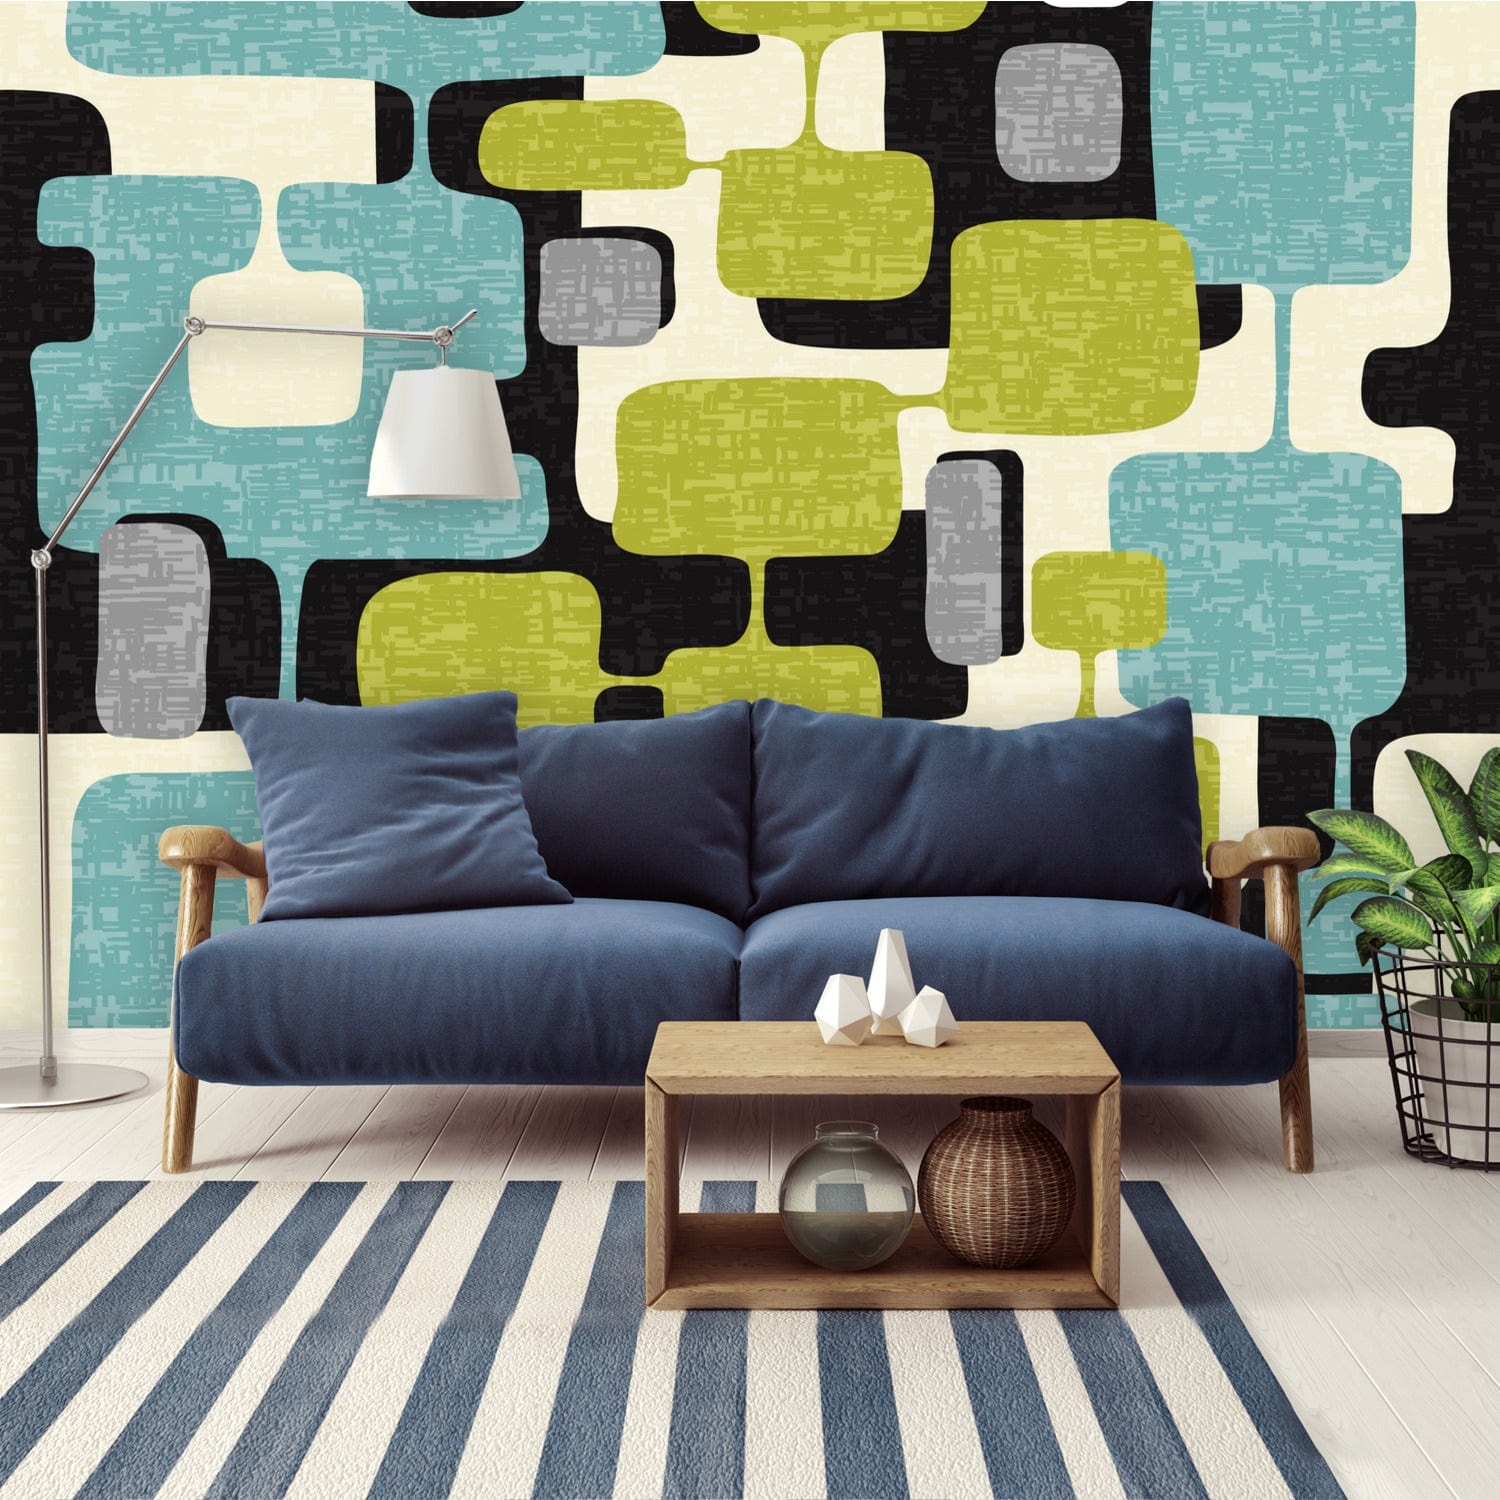 kate-mcenroe-nyc Wall Mural - Mid Century Modern Abstract, Retro Teal, Lime Green, Gray, Black MCM Wallpaper, Vintage Style Geometric Wall Covering Wall Mural H96 x W140 80728